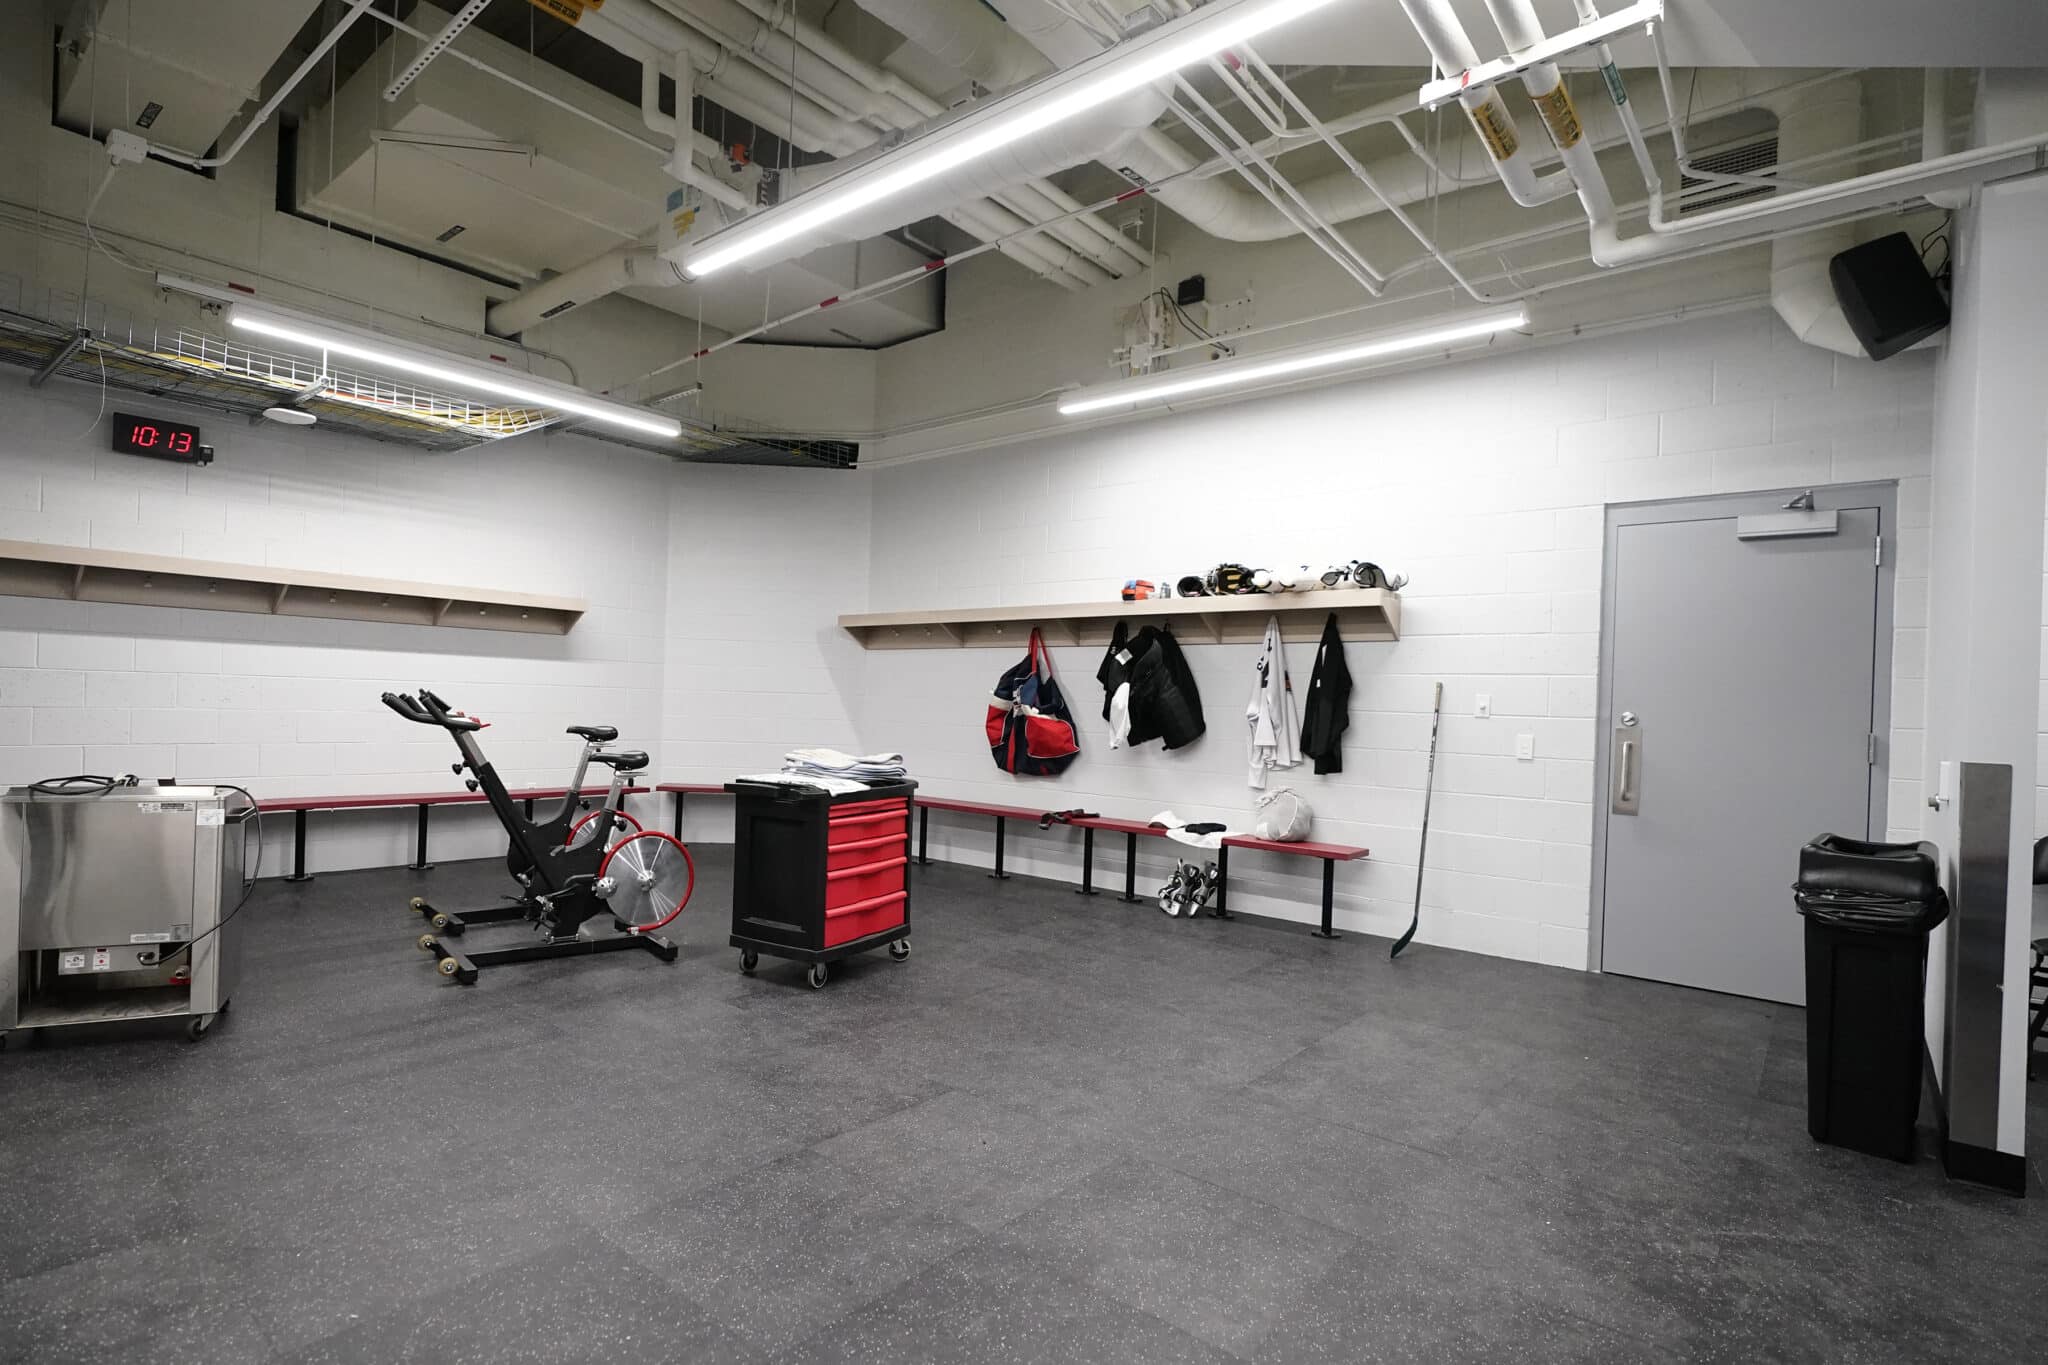 One of the locker rooms at the new Mullett Arena, the new hockey venue Arizona State University will be sharing with the Arizona Coyotes NHL hockey team in Tempe, Ariz., Monday, Oct. 24, 2022. (AP Photo/Ross D. Franklin)